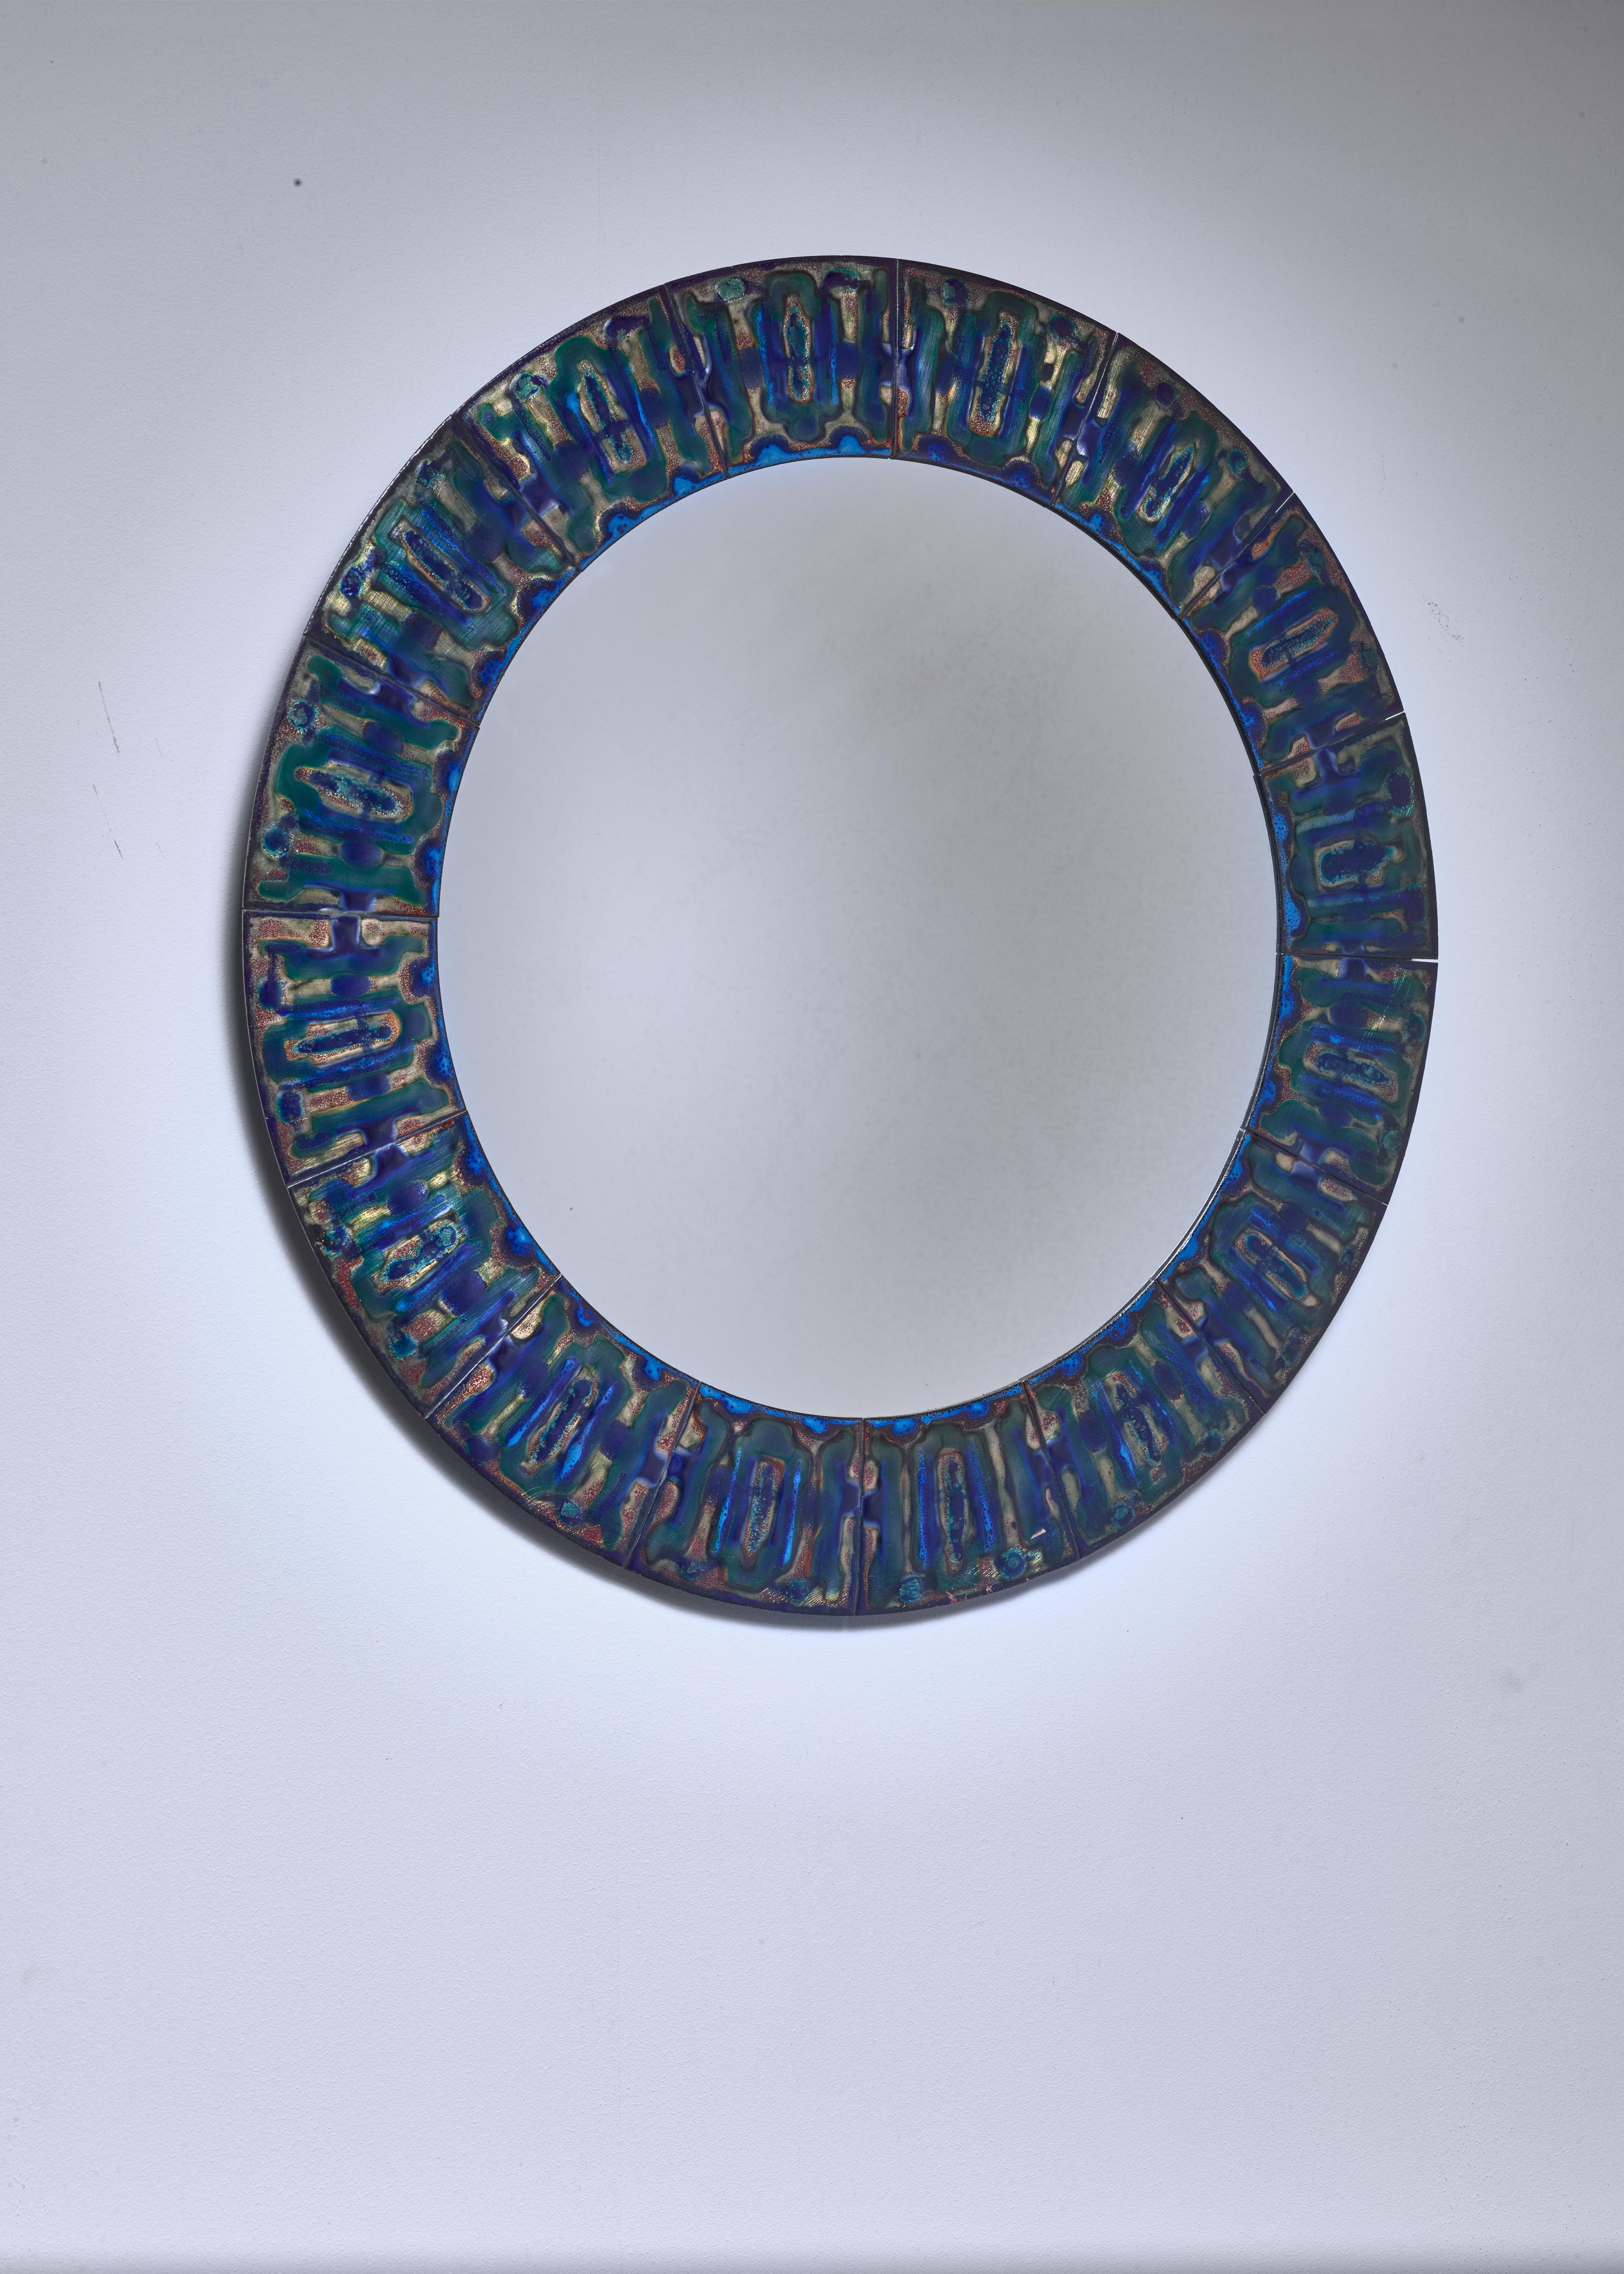 A round wall mirror by Danish designer Bodil Eje (1931-2006). The mirror has a frame made of polychrome enameled copper plates with a beautiful pattern.

Signed on the reverse by the artist.
 